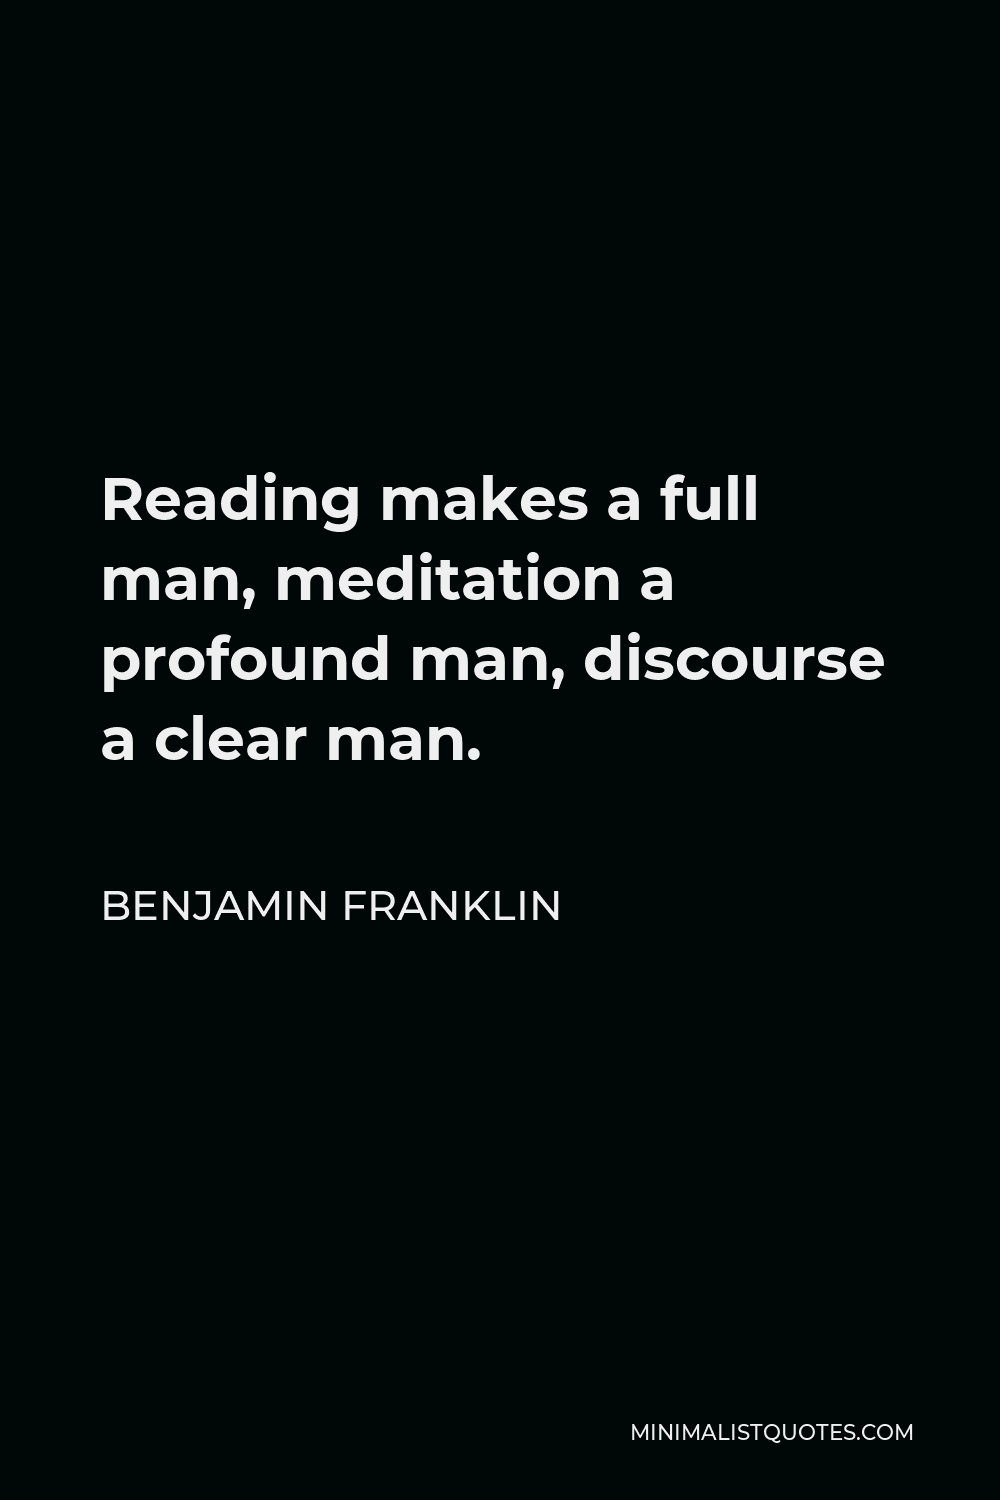 Benjamin Franklin Quote - Reading makes a full man, meditation a profound man, discourse a clear man.